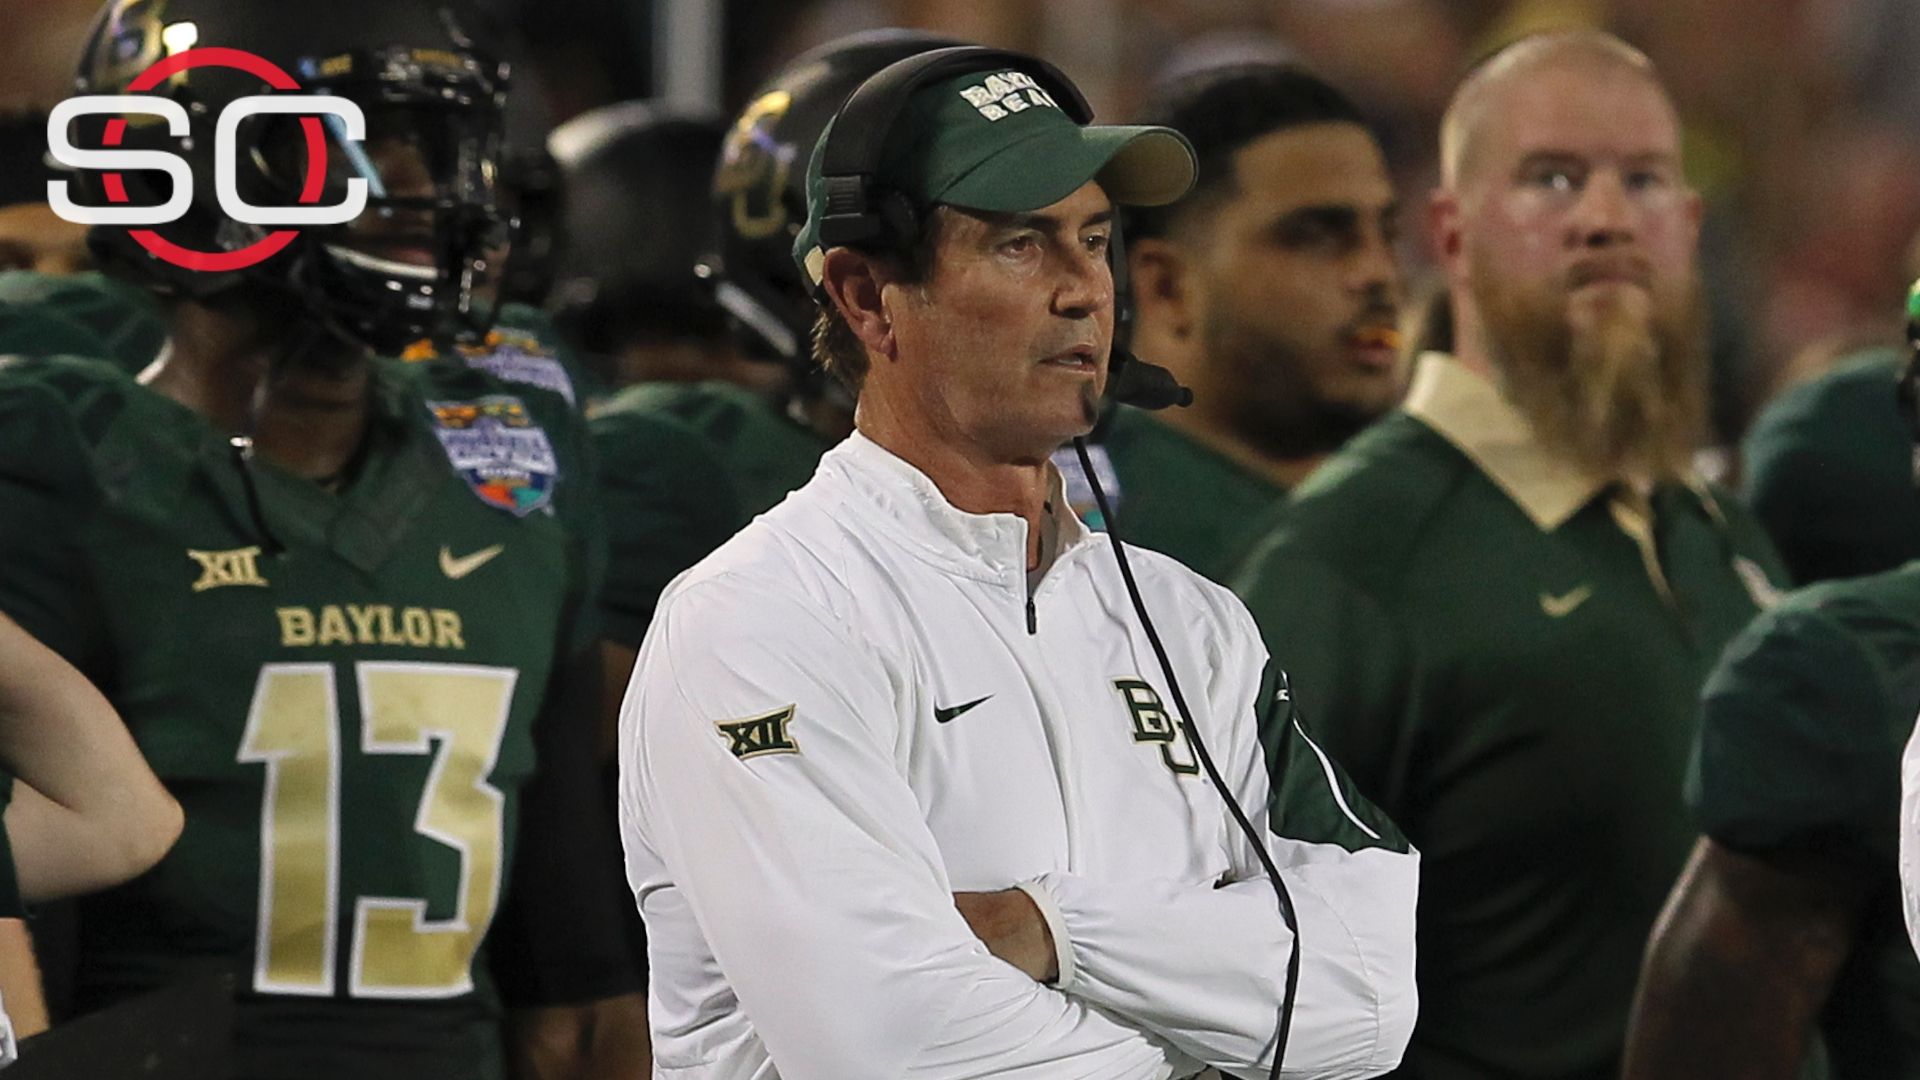 Briles, coaches tried to cover up player misbehavior